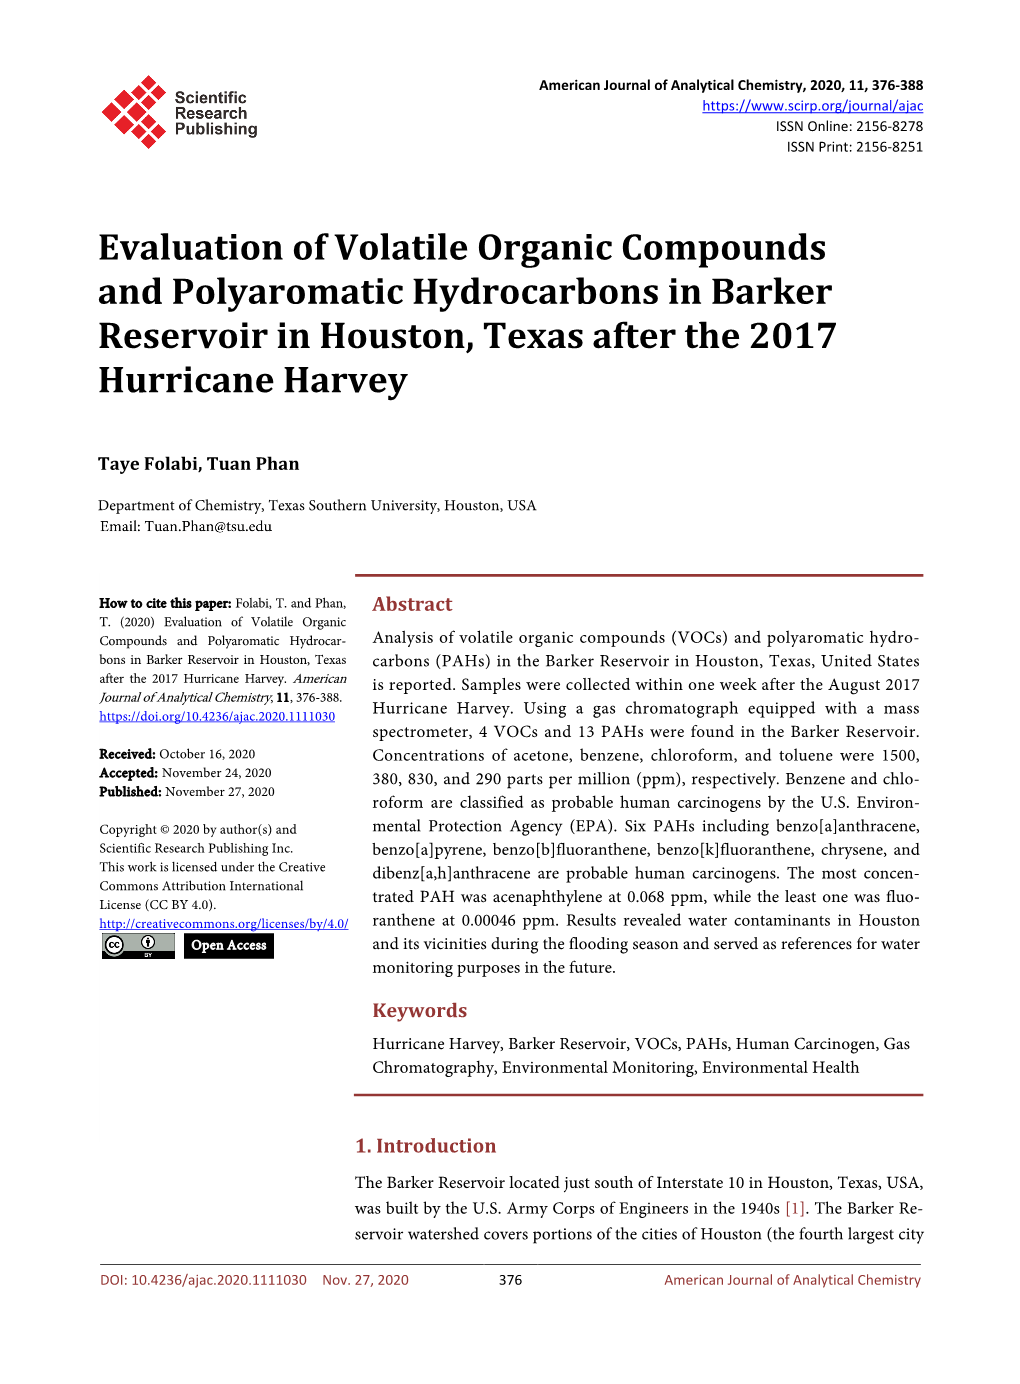 Evaluation of Volatile Organic Compounds and Polyaromatic Hydrocarbons in Barker Reservoir in Houston, Texas After the 2017 Hurricane Harvey